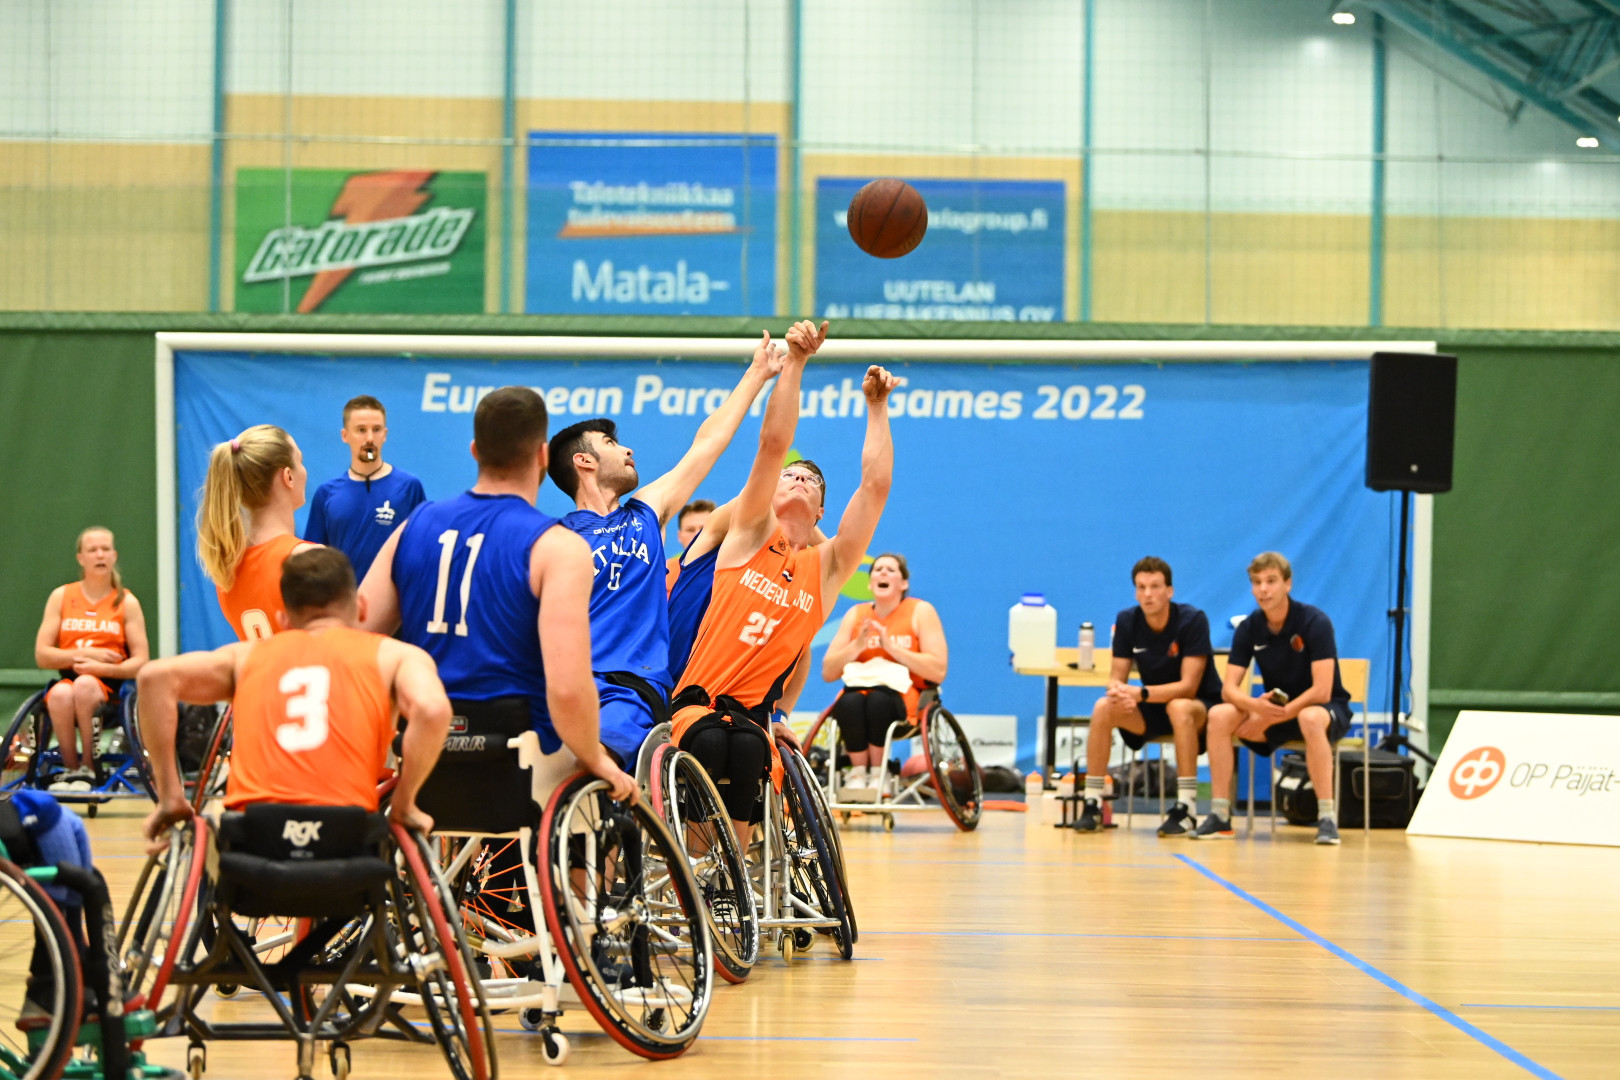 Wheelchair basketball was among the sports on the programme for the 2022 European Para Youth Games ©European Para Championships